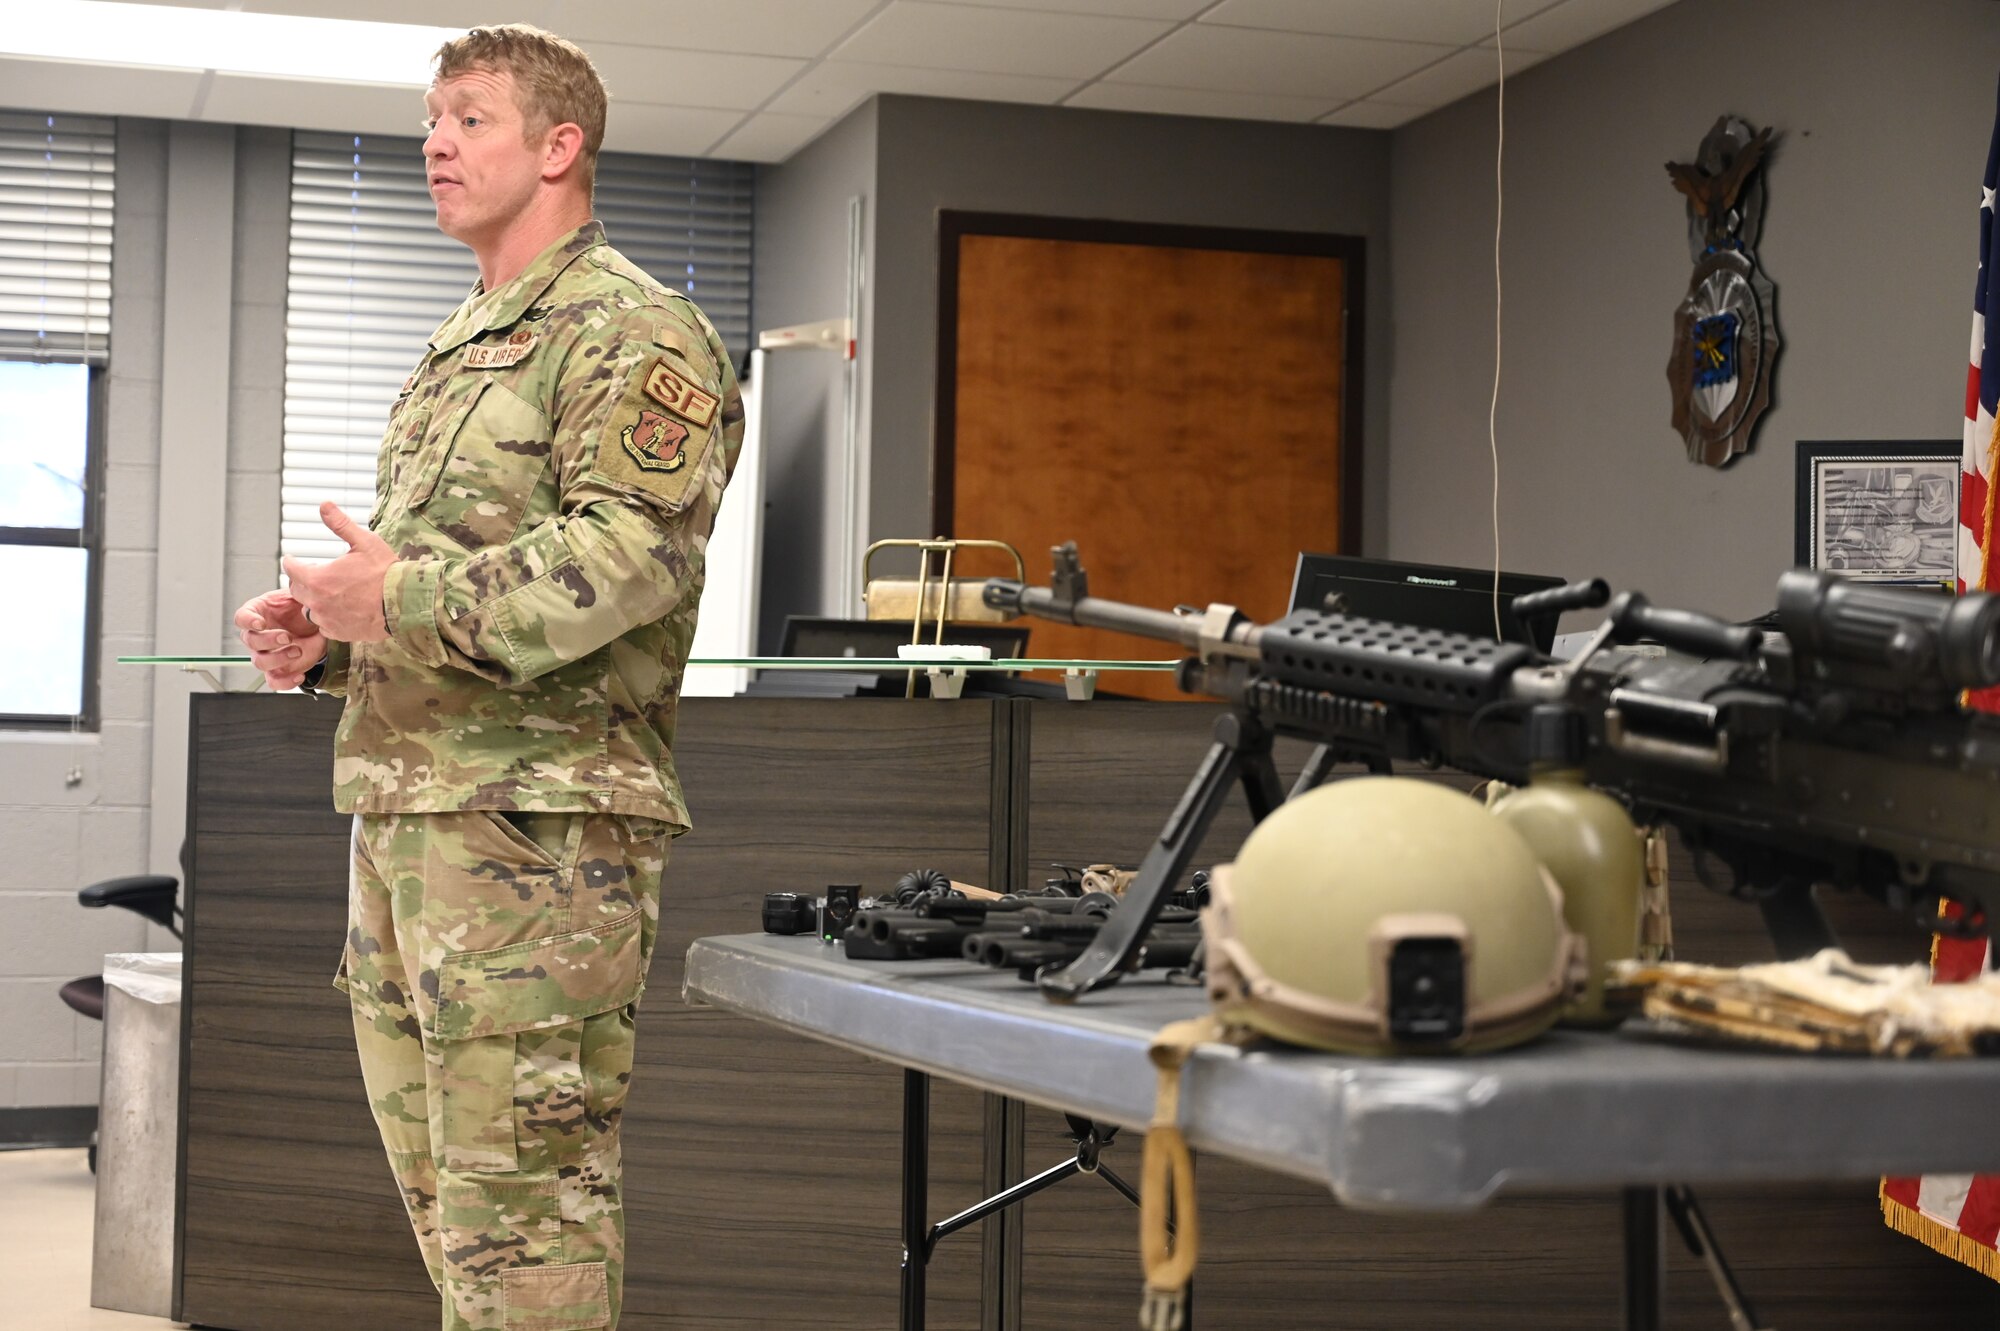 Morris stands in front of table that contains security forces equipment such as helmets and weapons.